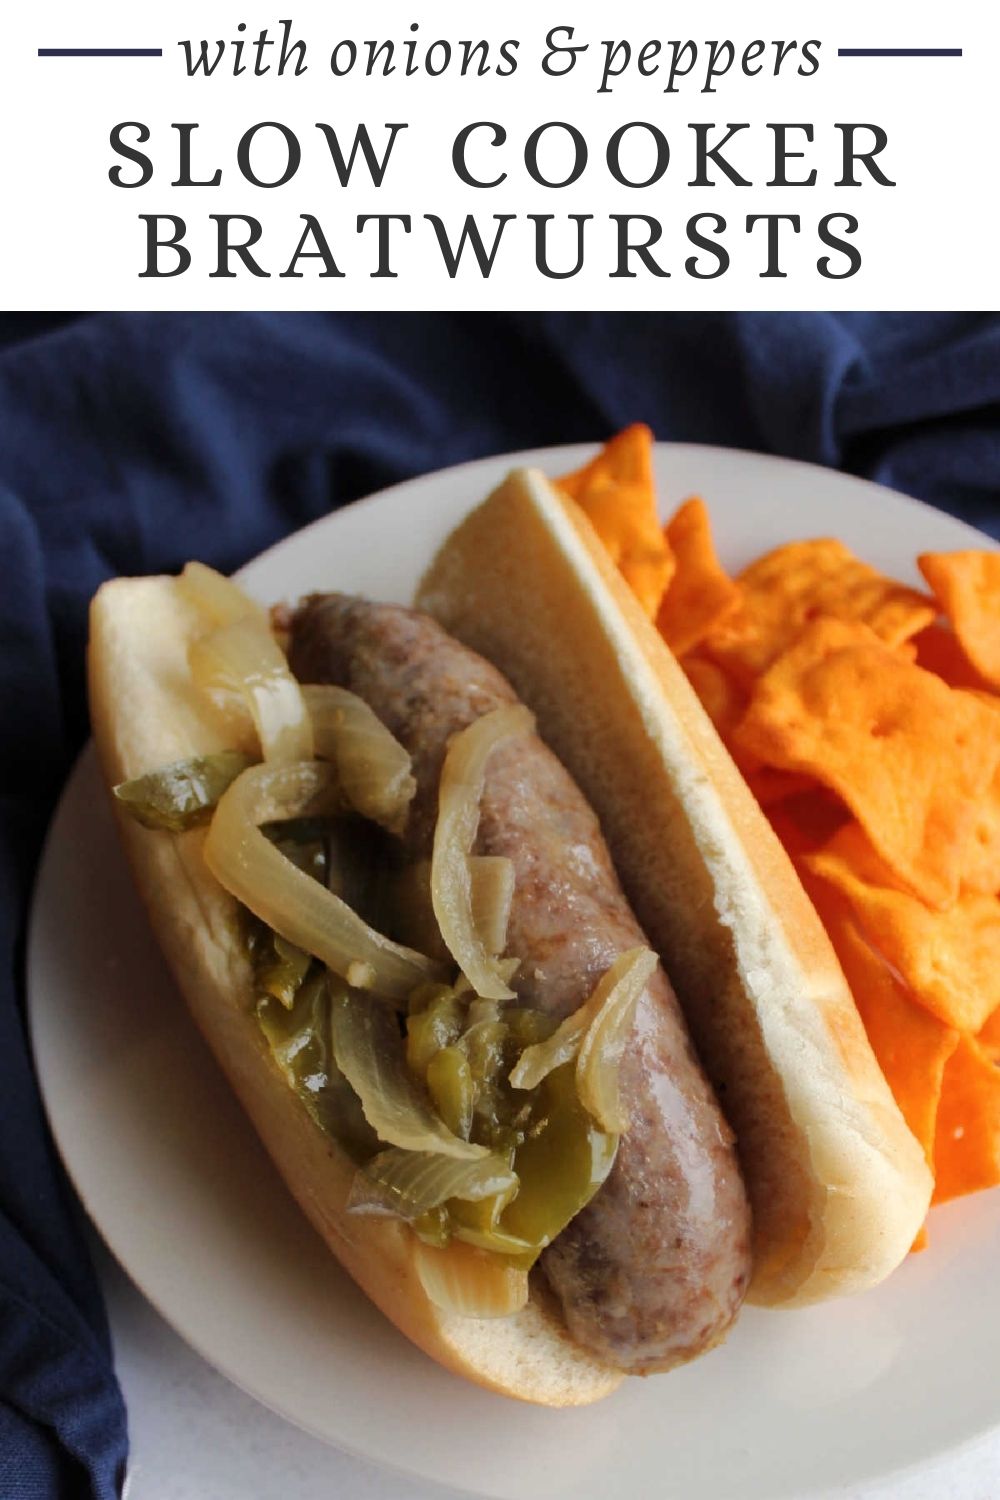 Slow cooker brats are a perfectly busy day dinner entree. Put one on a bun and pile it up with the peppers and onions for a tasty and easy meal.